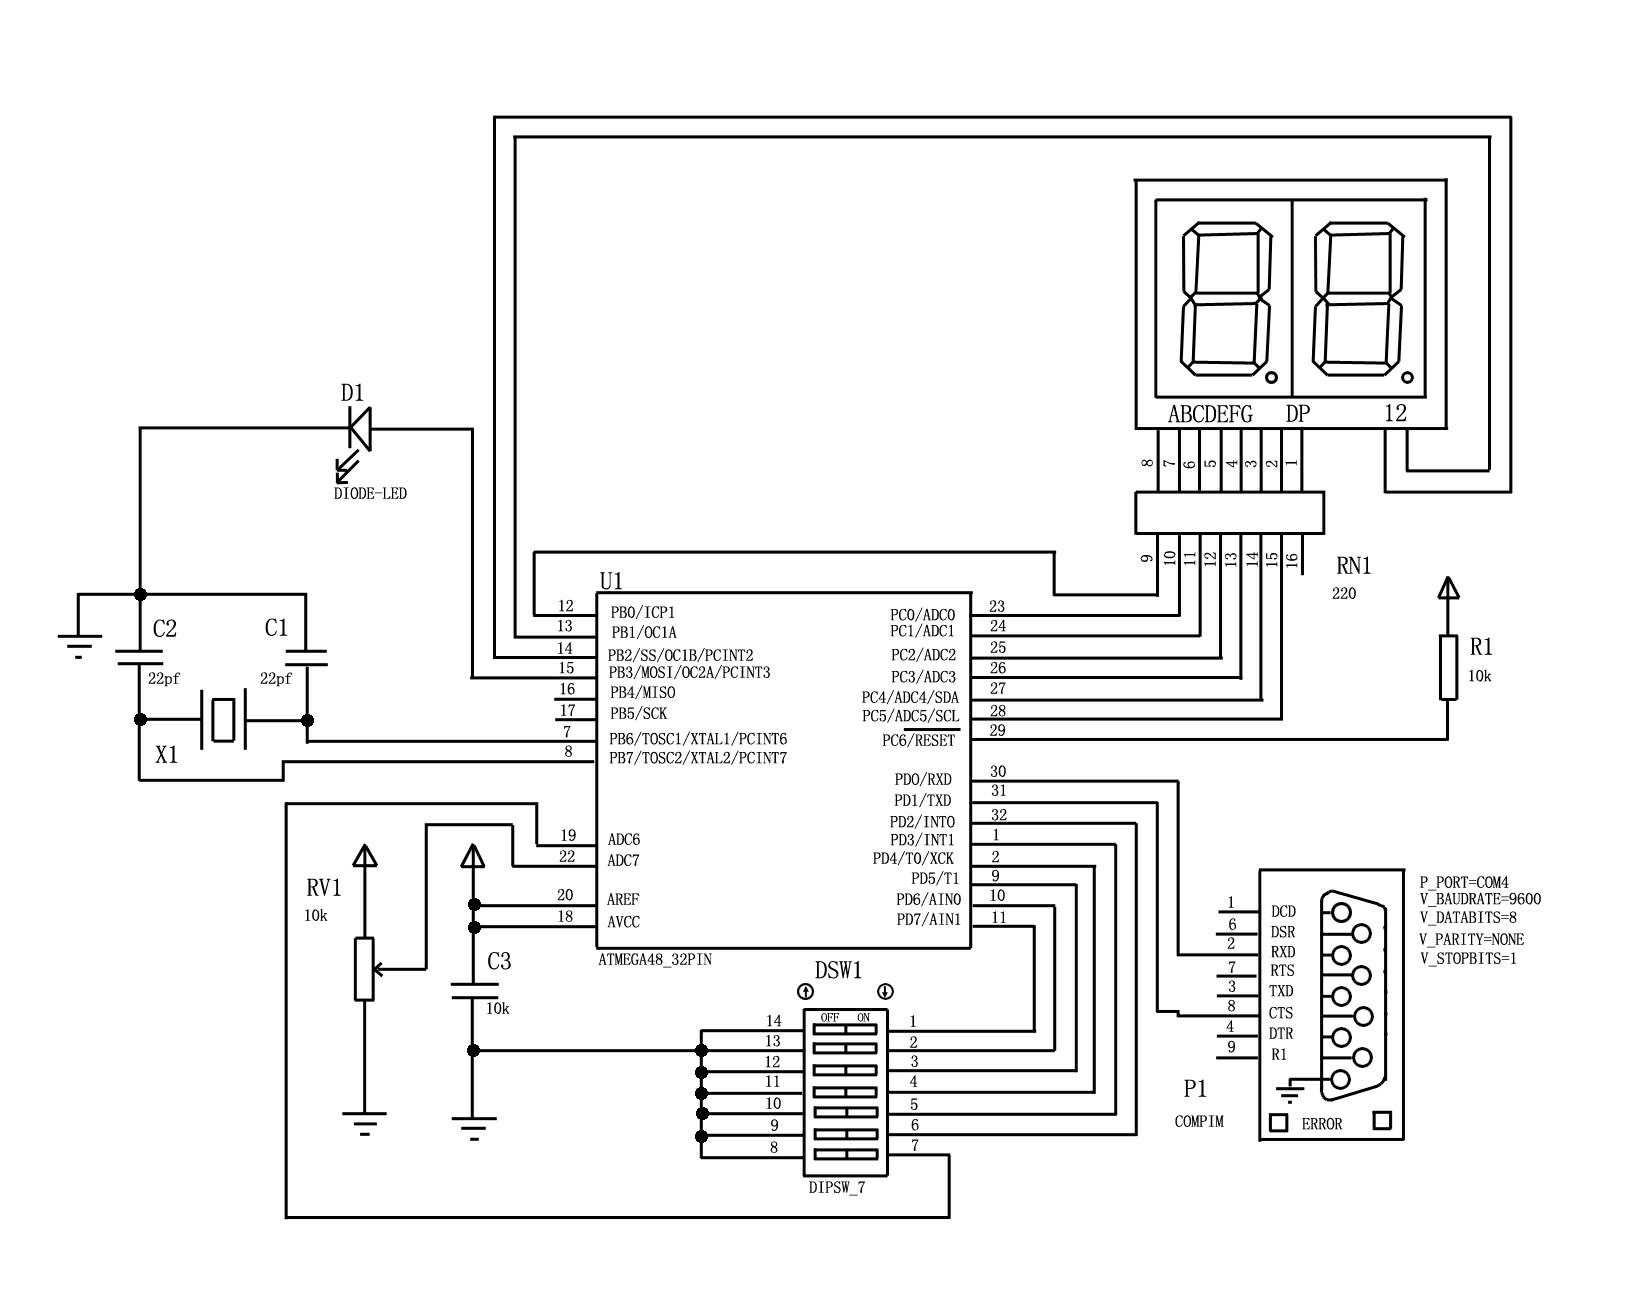 Simulation teaching system for single-chip microcomputer curriculum